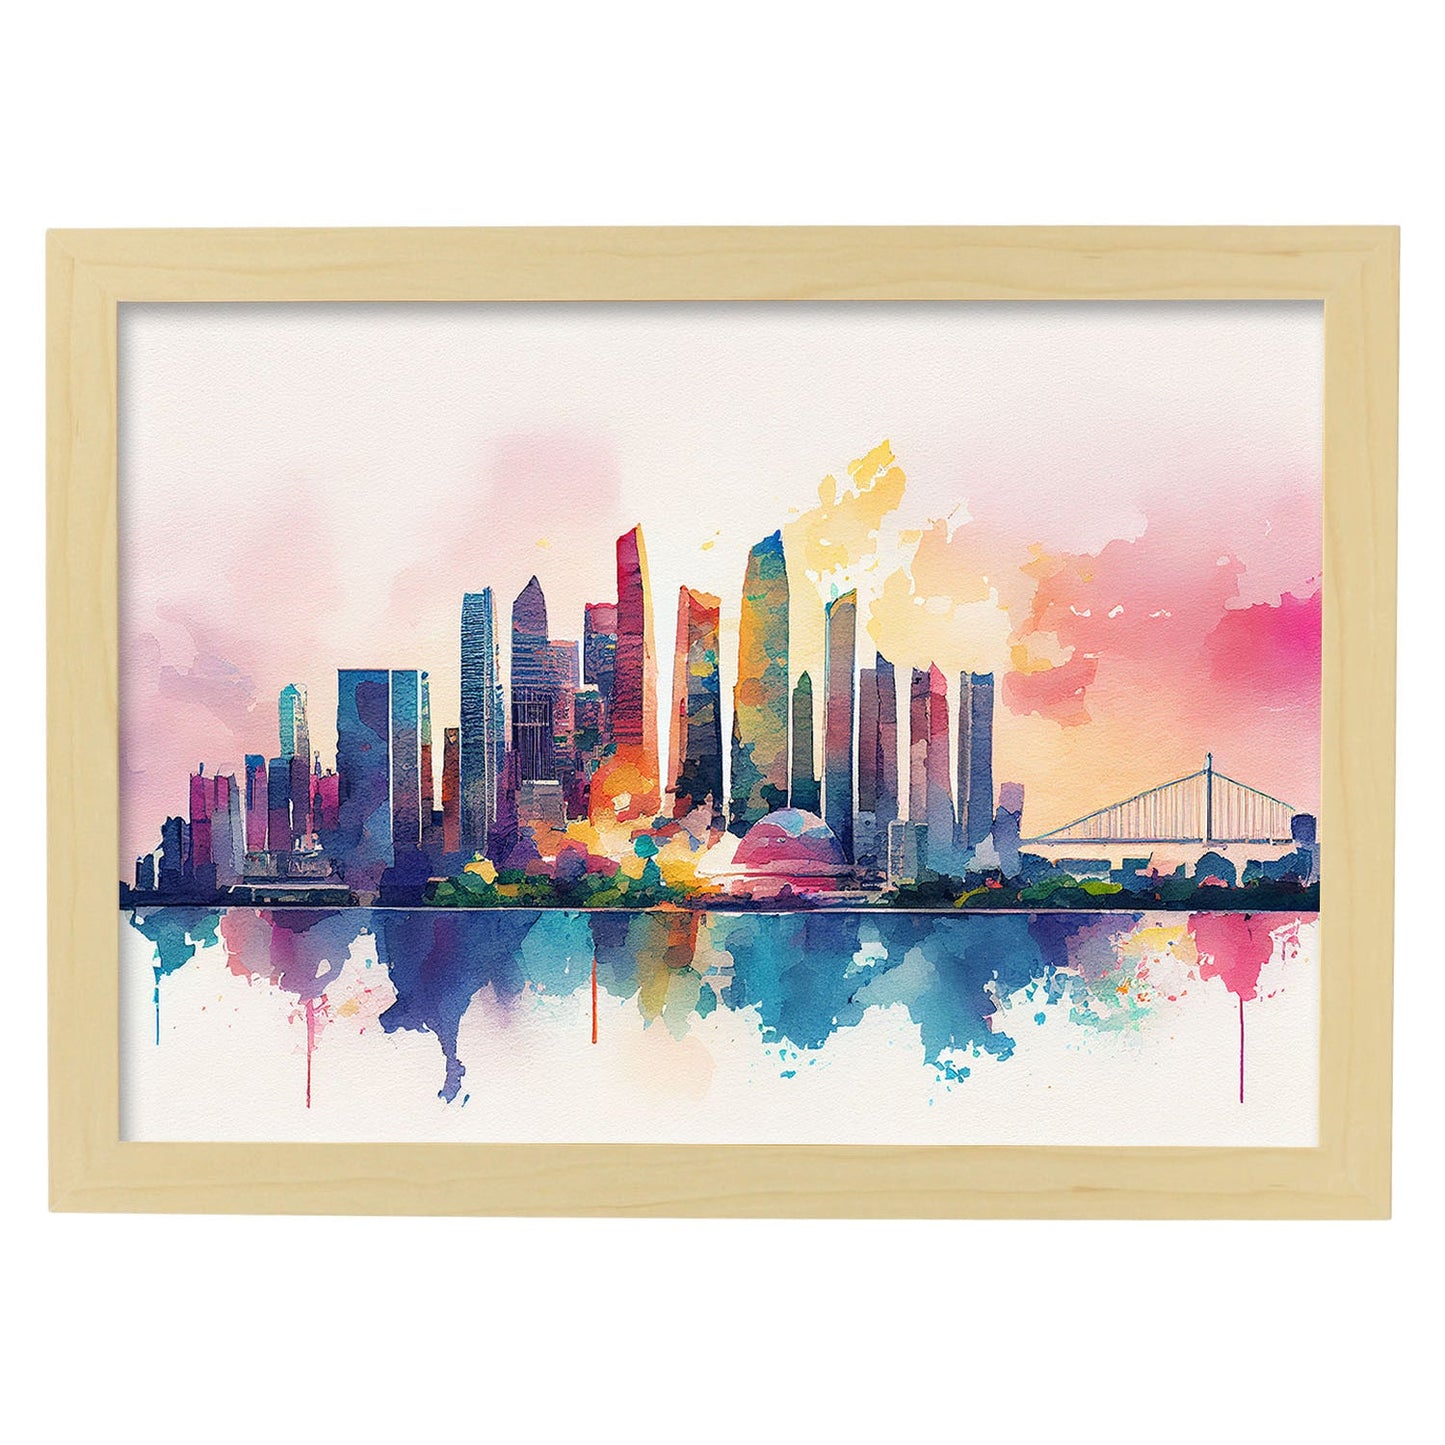 Nacnic watercolor of a skyline of the city of Singapore_1. Aesthetic Wall Art Prints for Bedroom or Living Room Design.-Artwork-Nacnic-A4-Marco Madera Clara-Nacnic Estudio SL